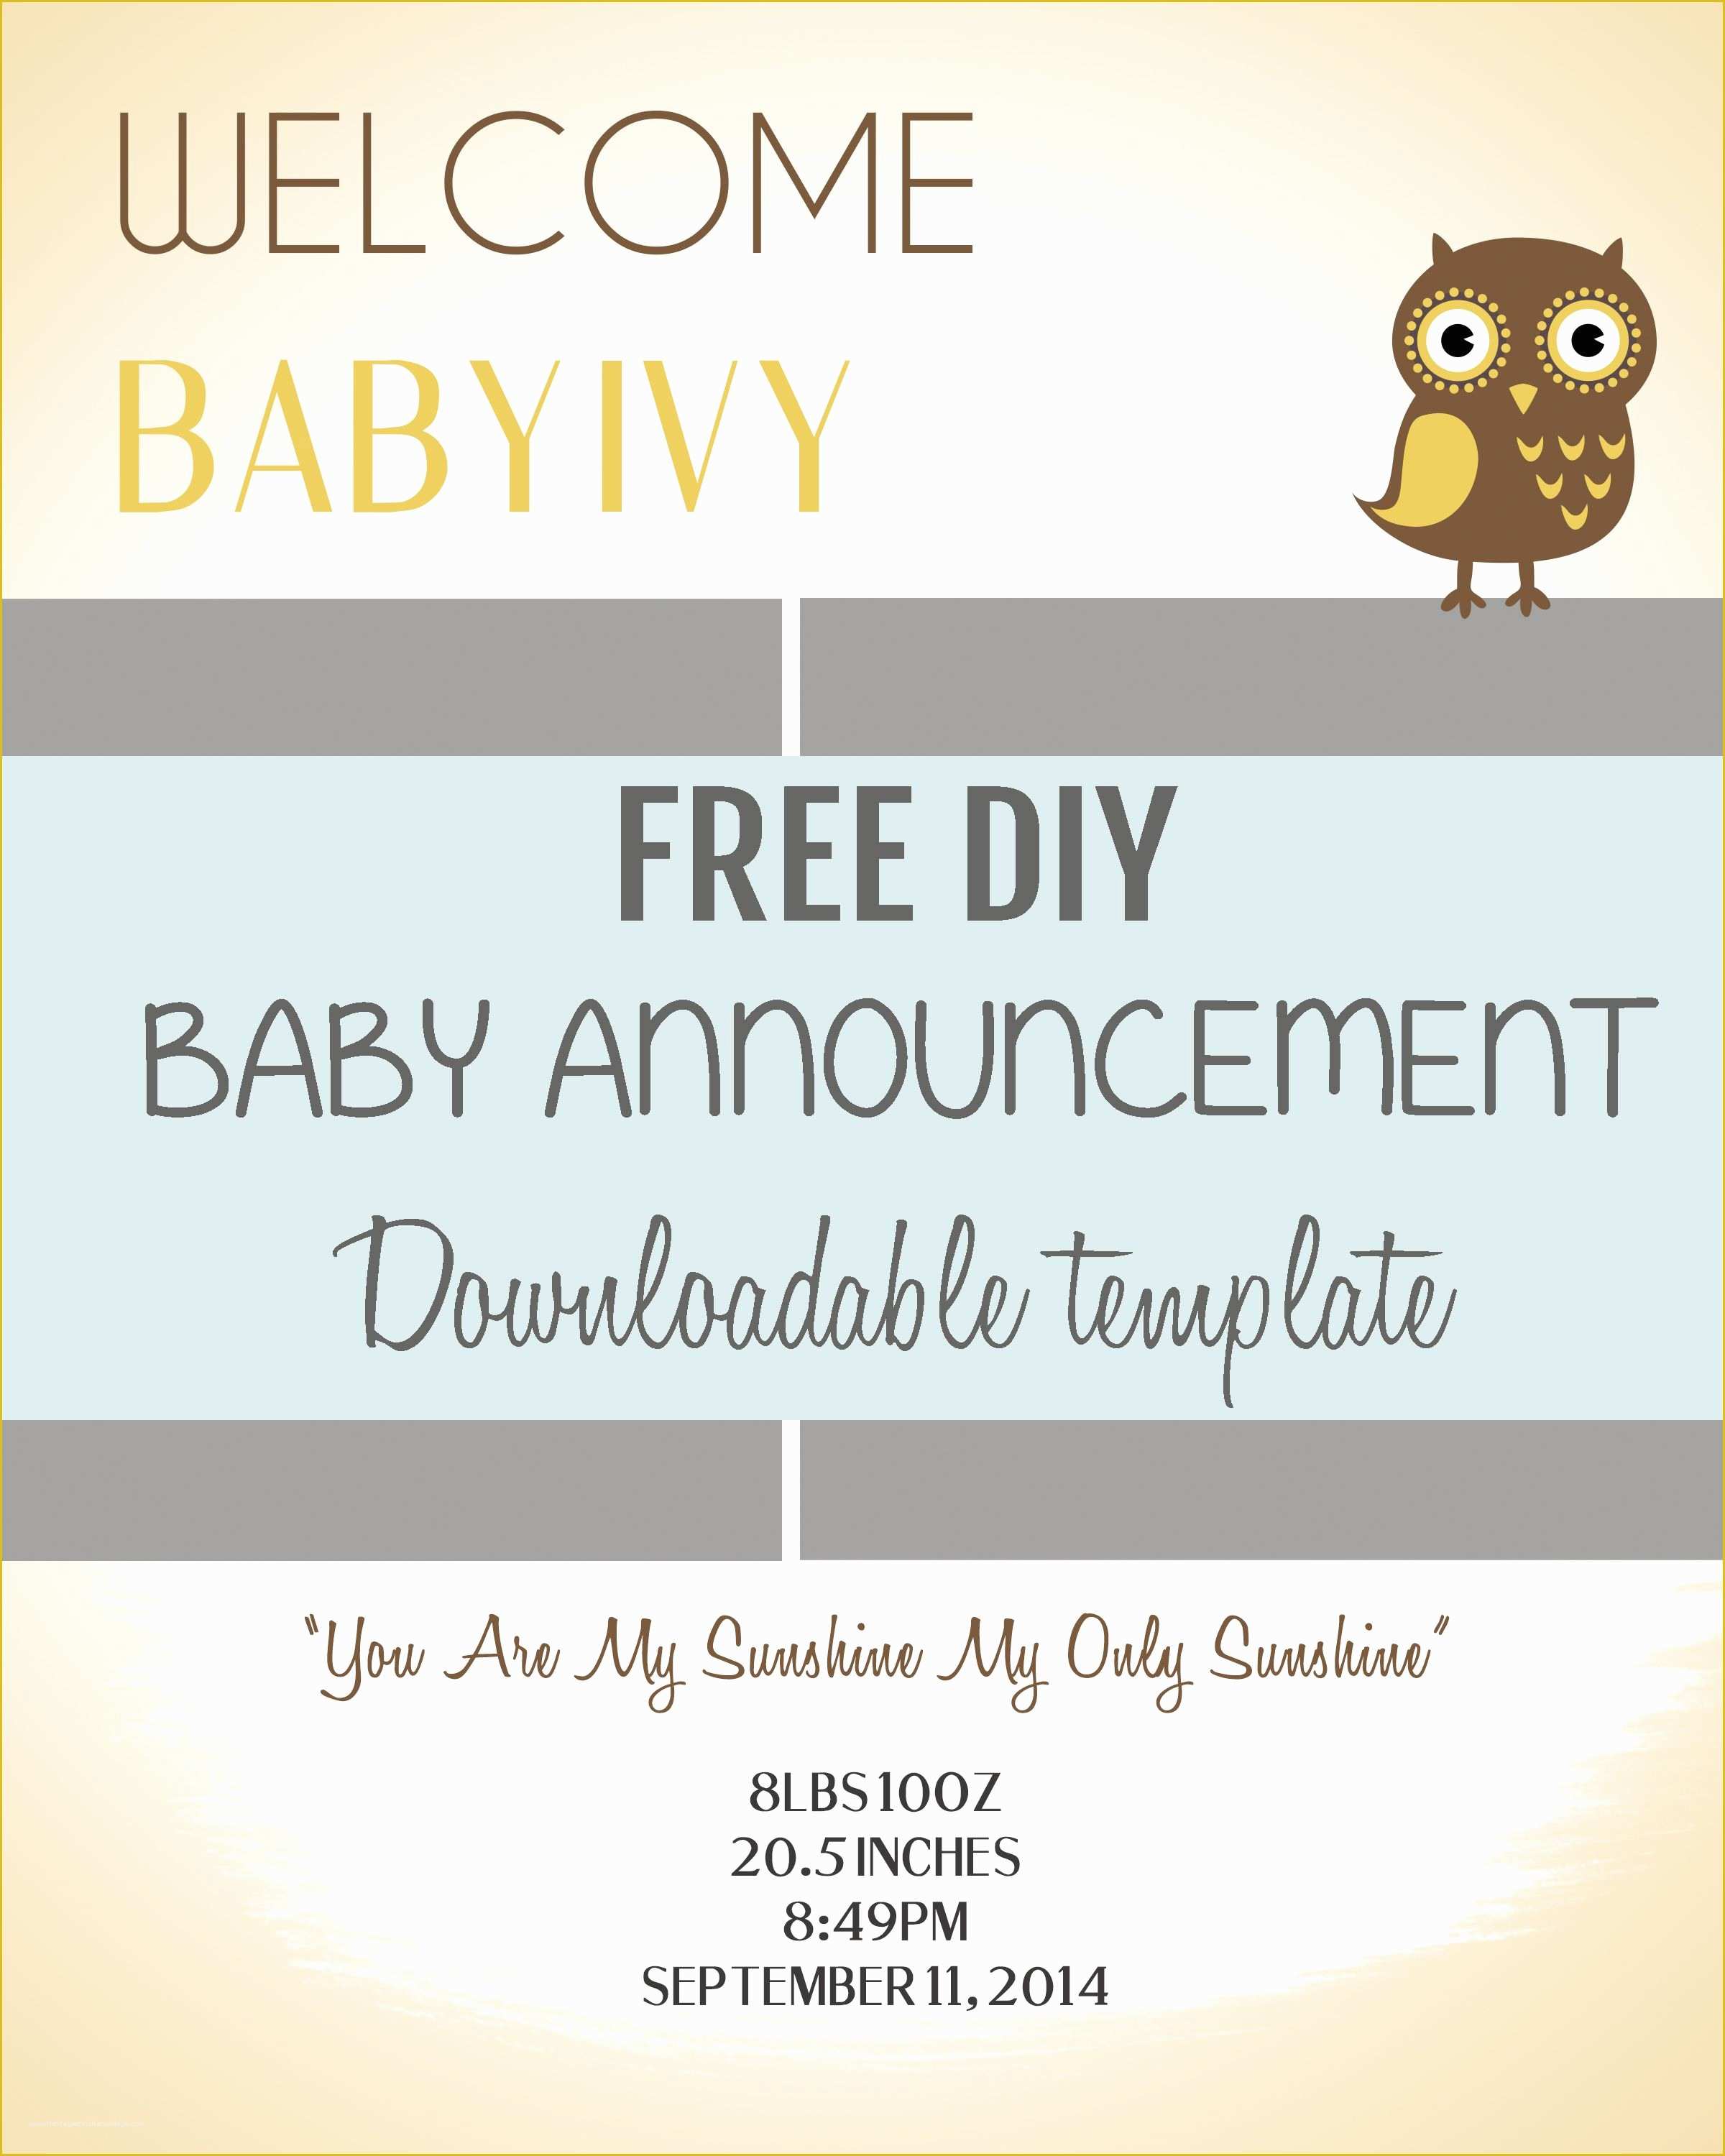 Birth Announcement Template Free Printable Of Diy Baby Announcement Template